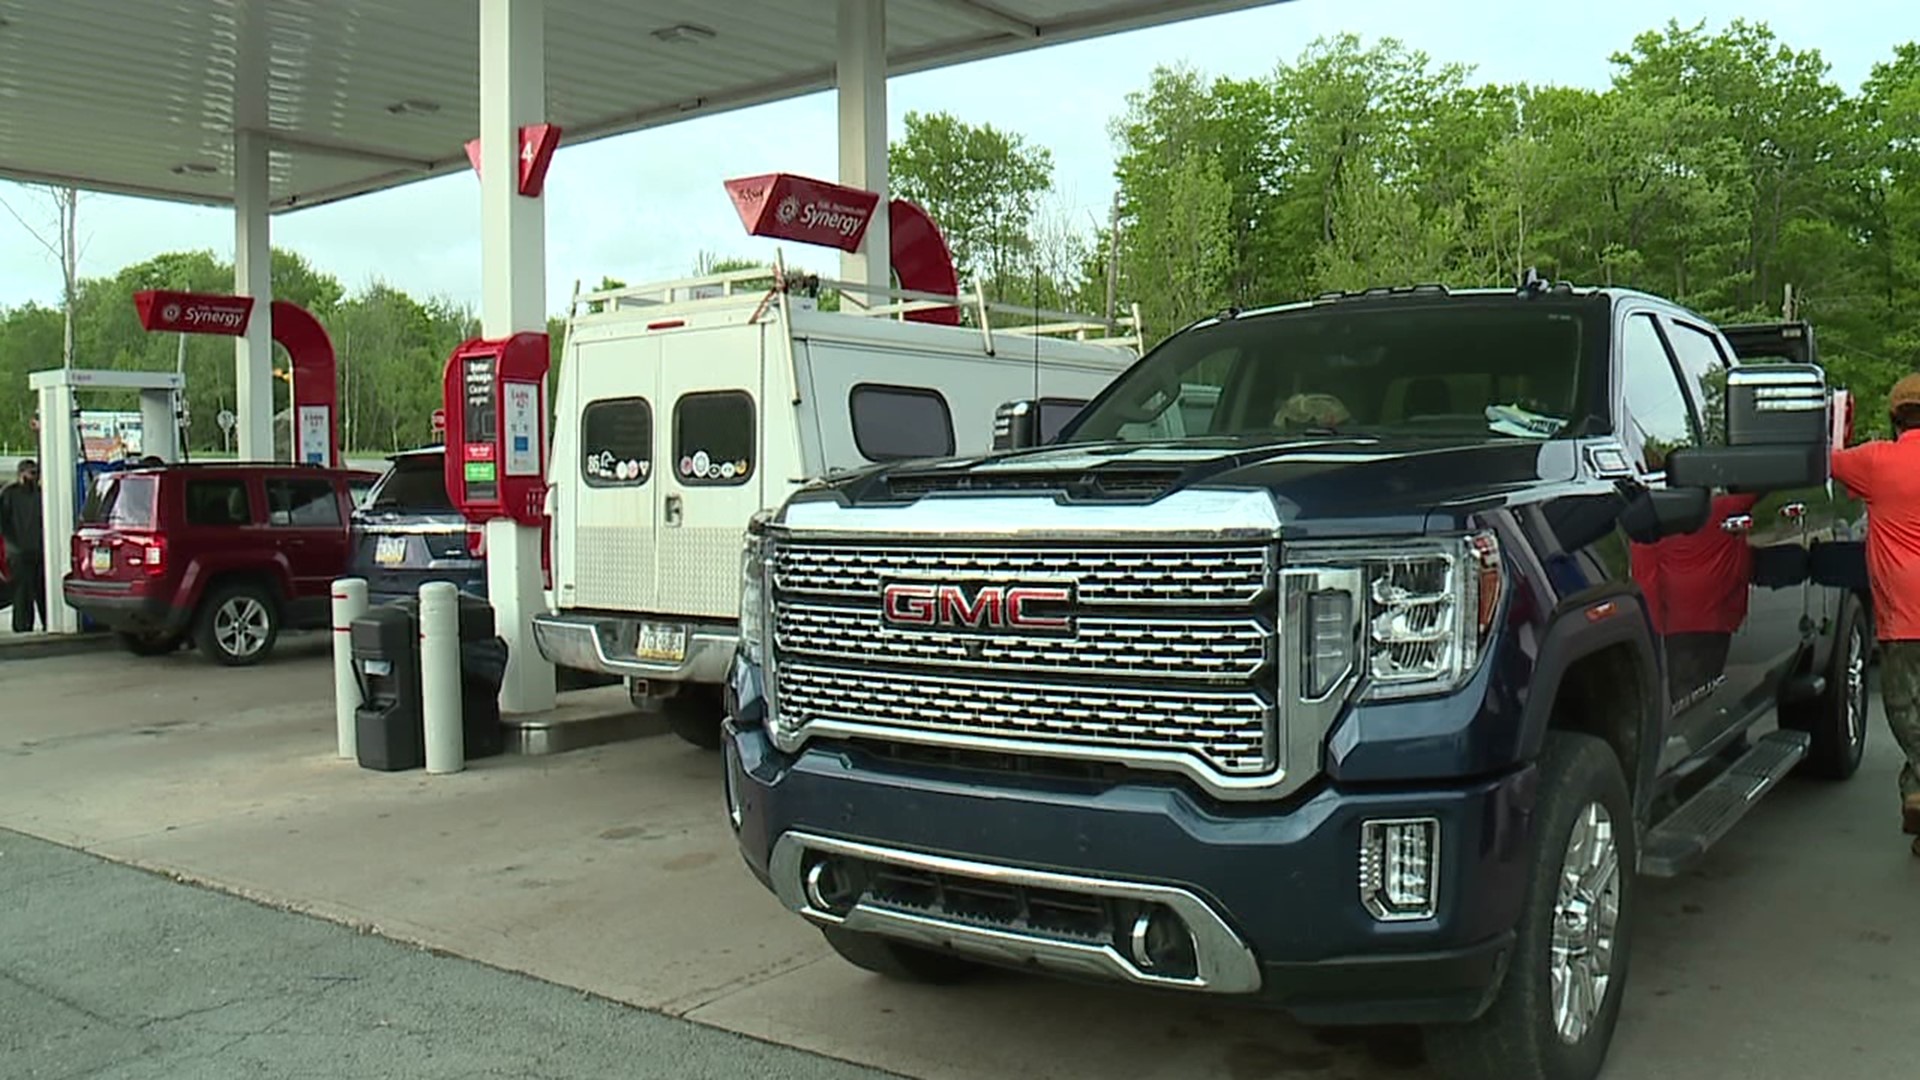 Record-high prices at the pump have some people changing their annual travel plans.